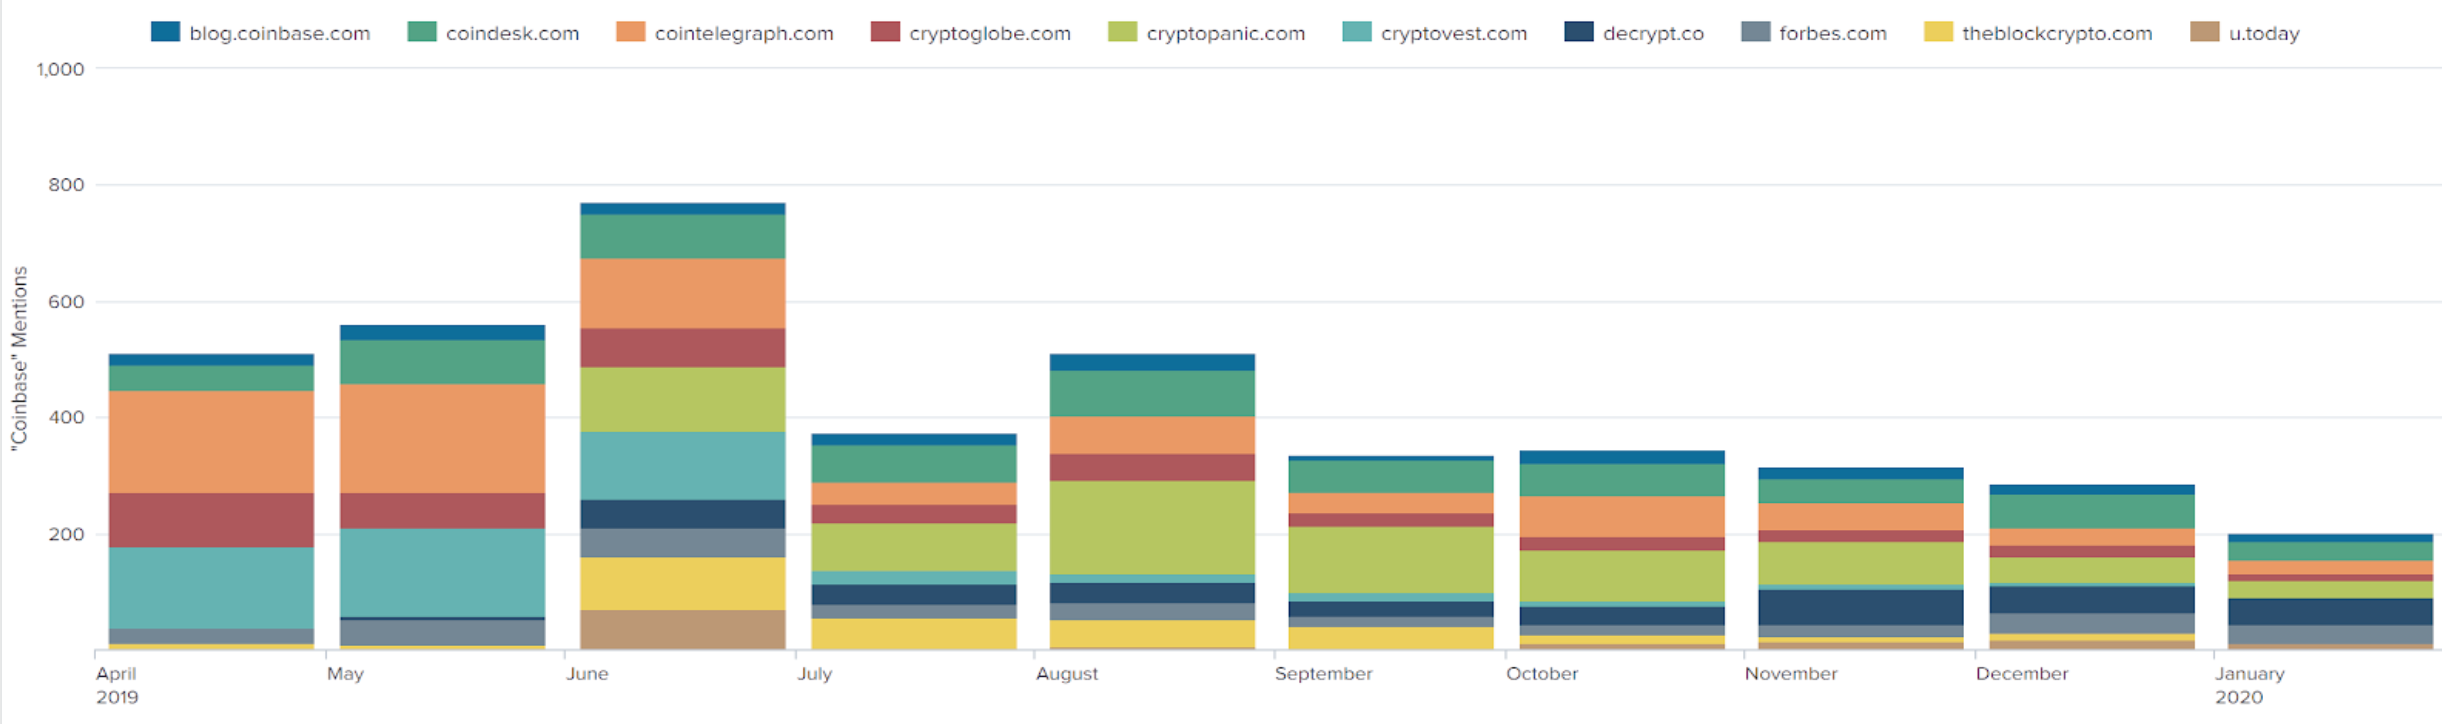 Coinbase Mentions by Media Outlet (Jan 20, 2020; -9mon). Source: NTerminal